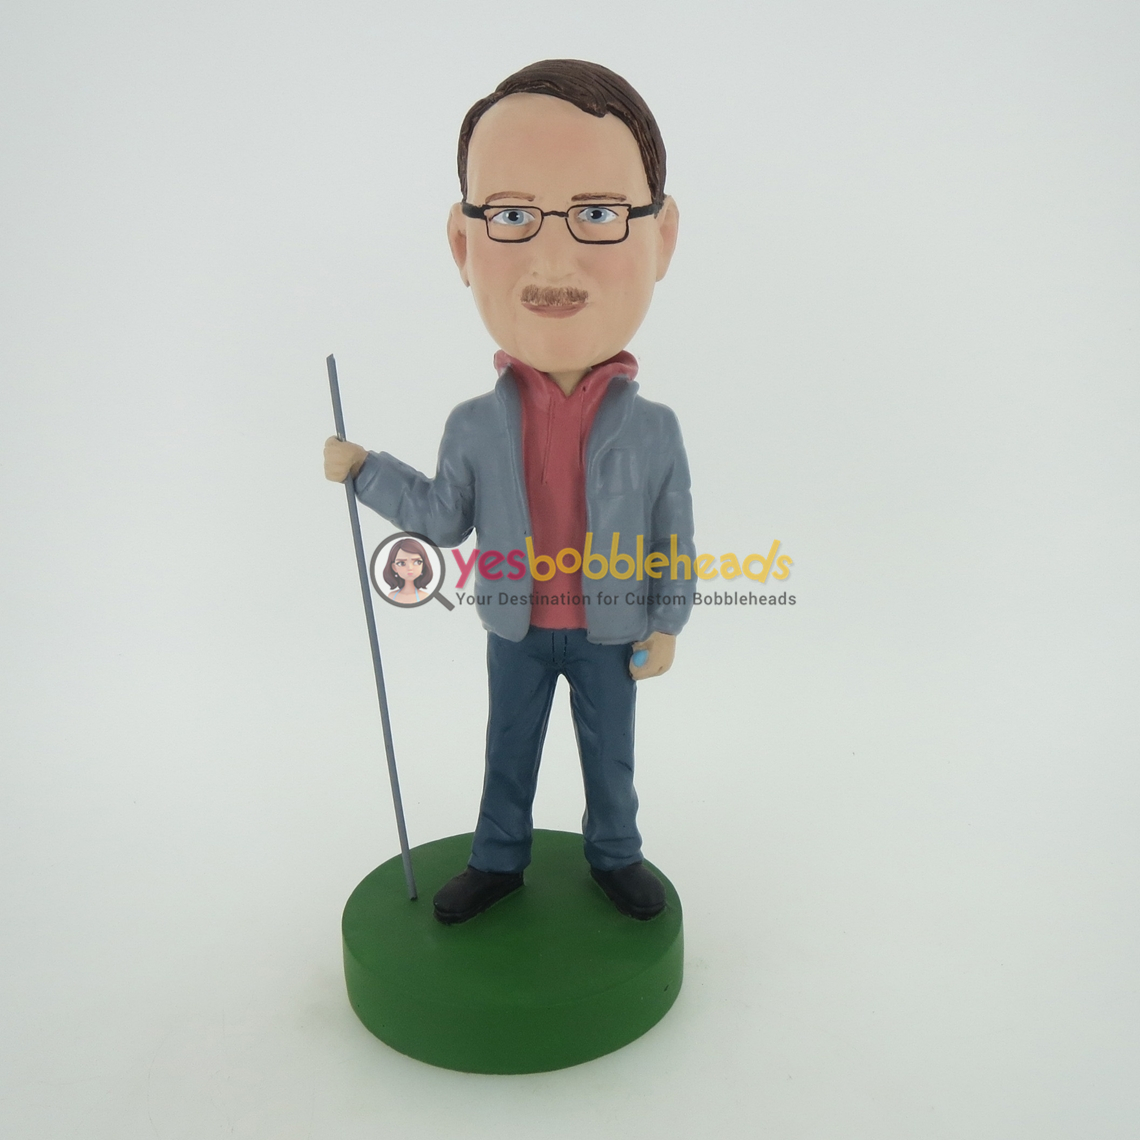 Picture of Custom Bobblehead Doll: Man With Rod